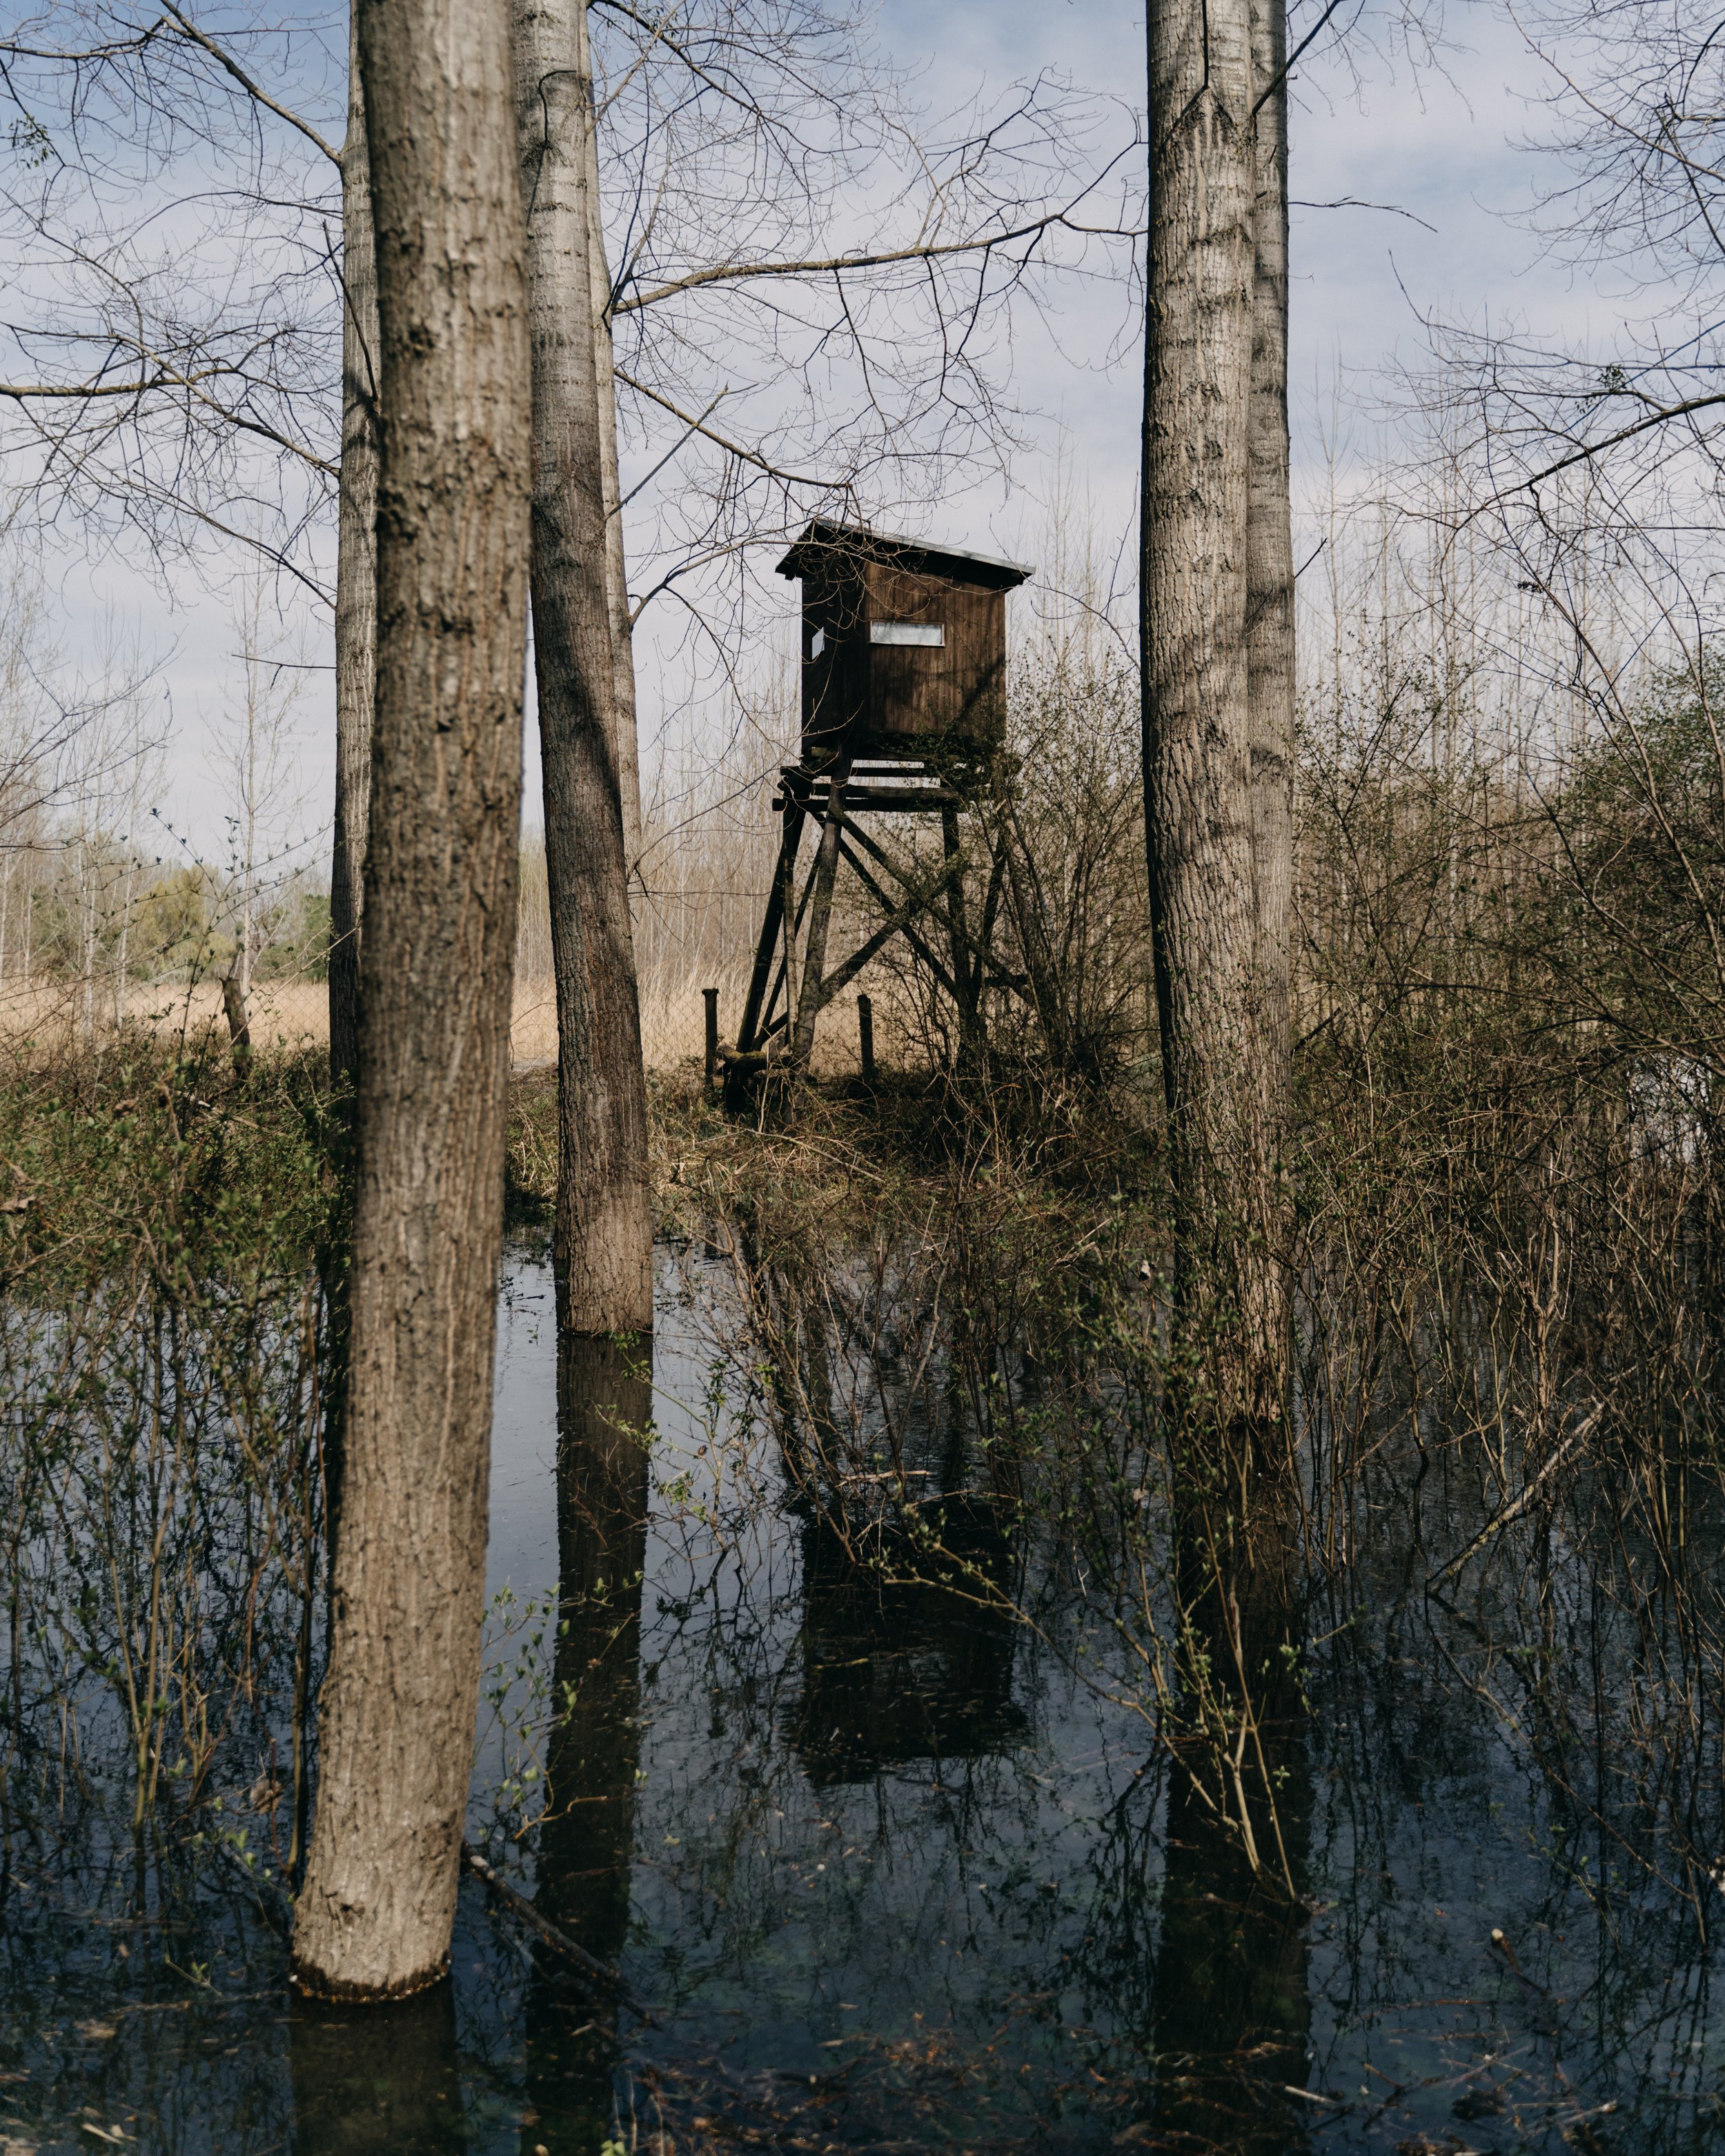  Slovakia, Dunajske luhy, 04 April 2023. A hunting blind and partially submerged trees mark the spring flooding near the Stare Trstie area. This part receives water once or twice per year, and is covered with water usually from March or April until J